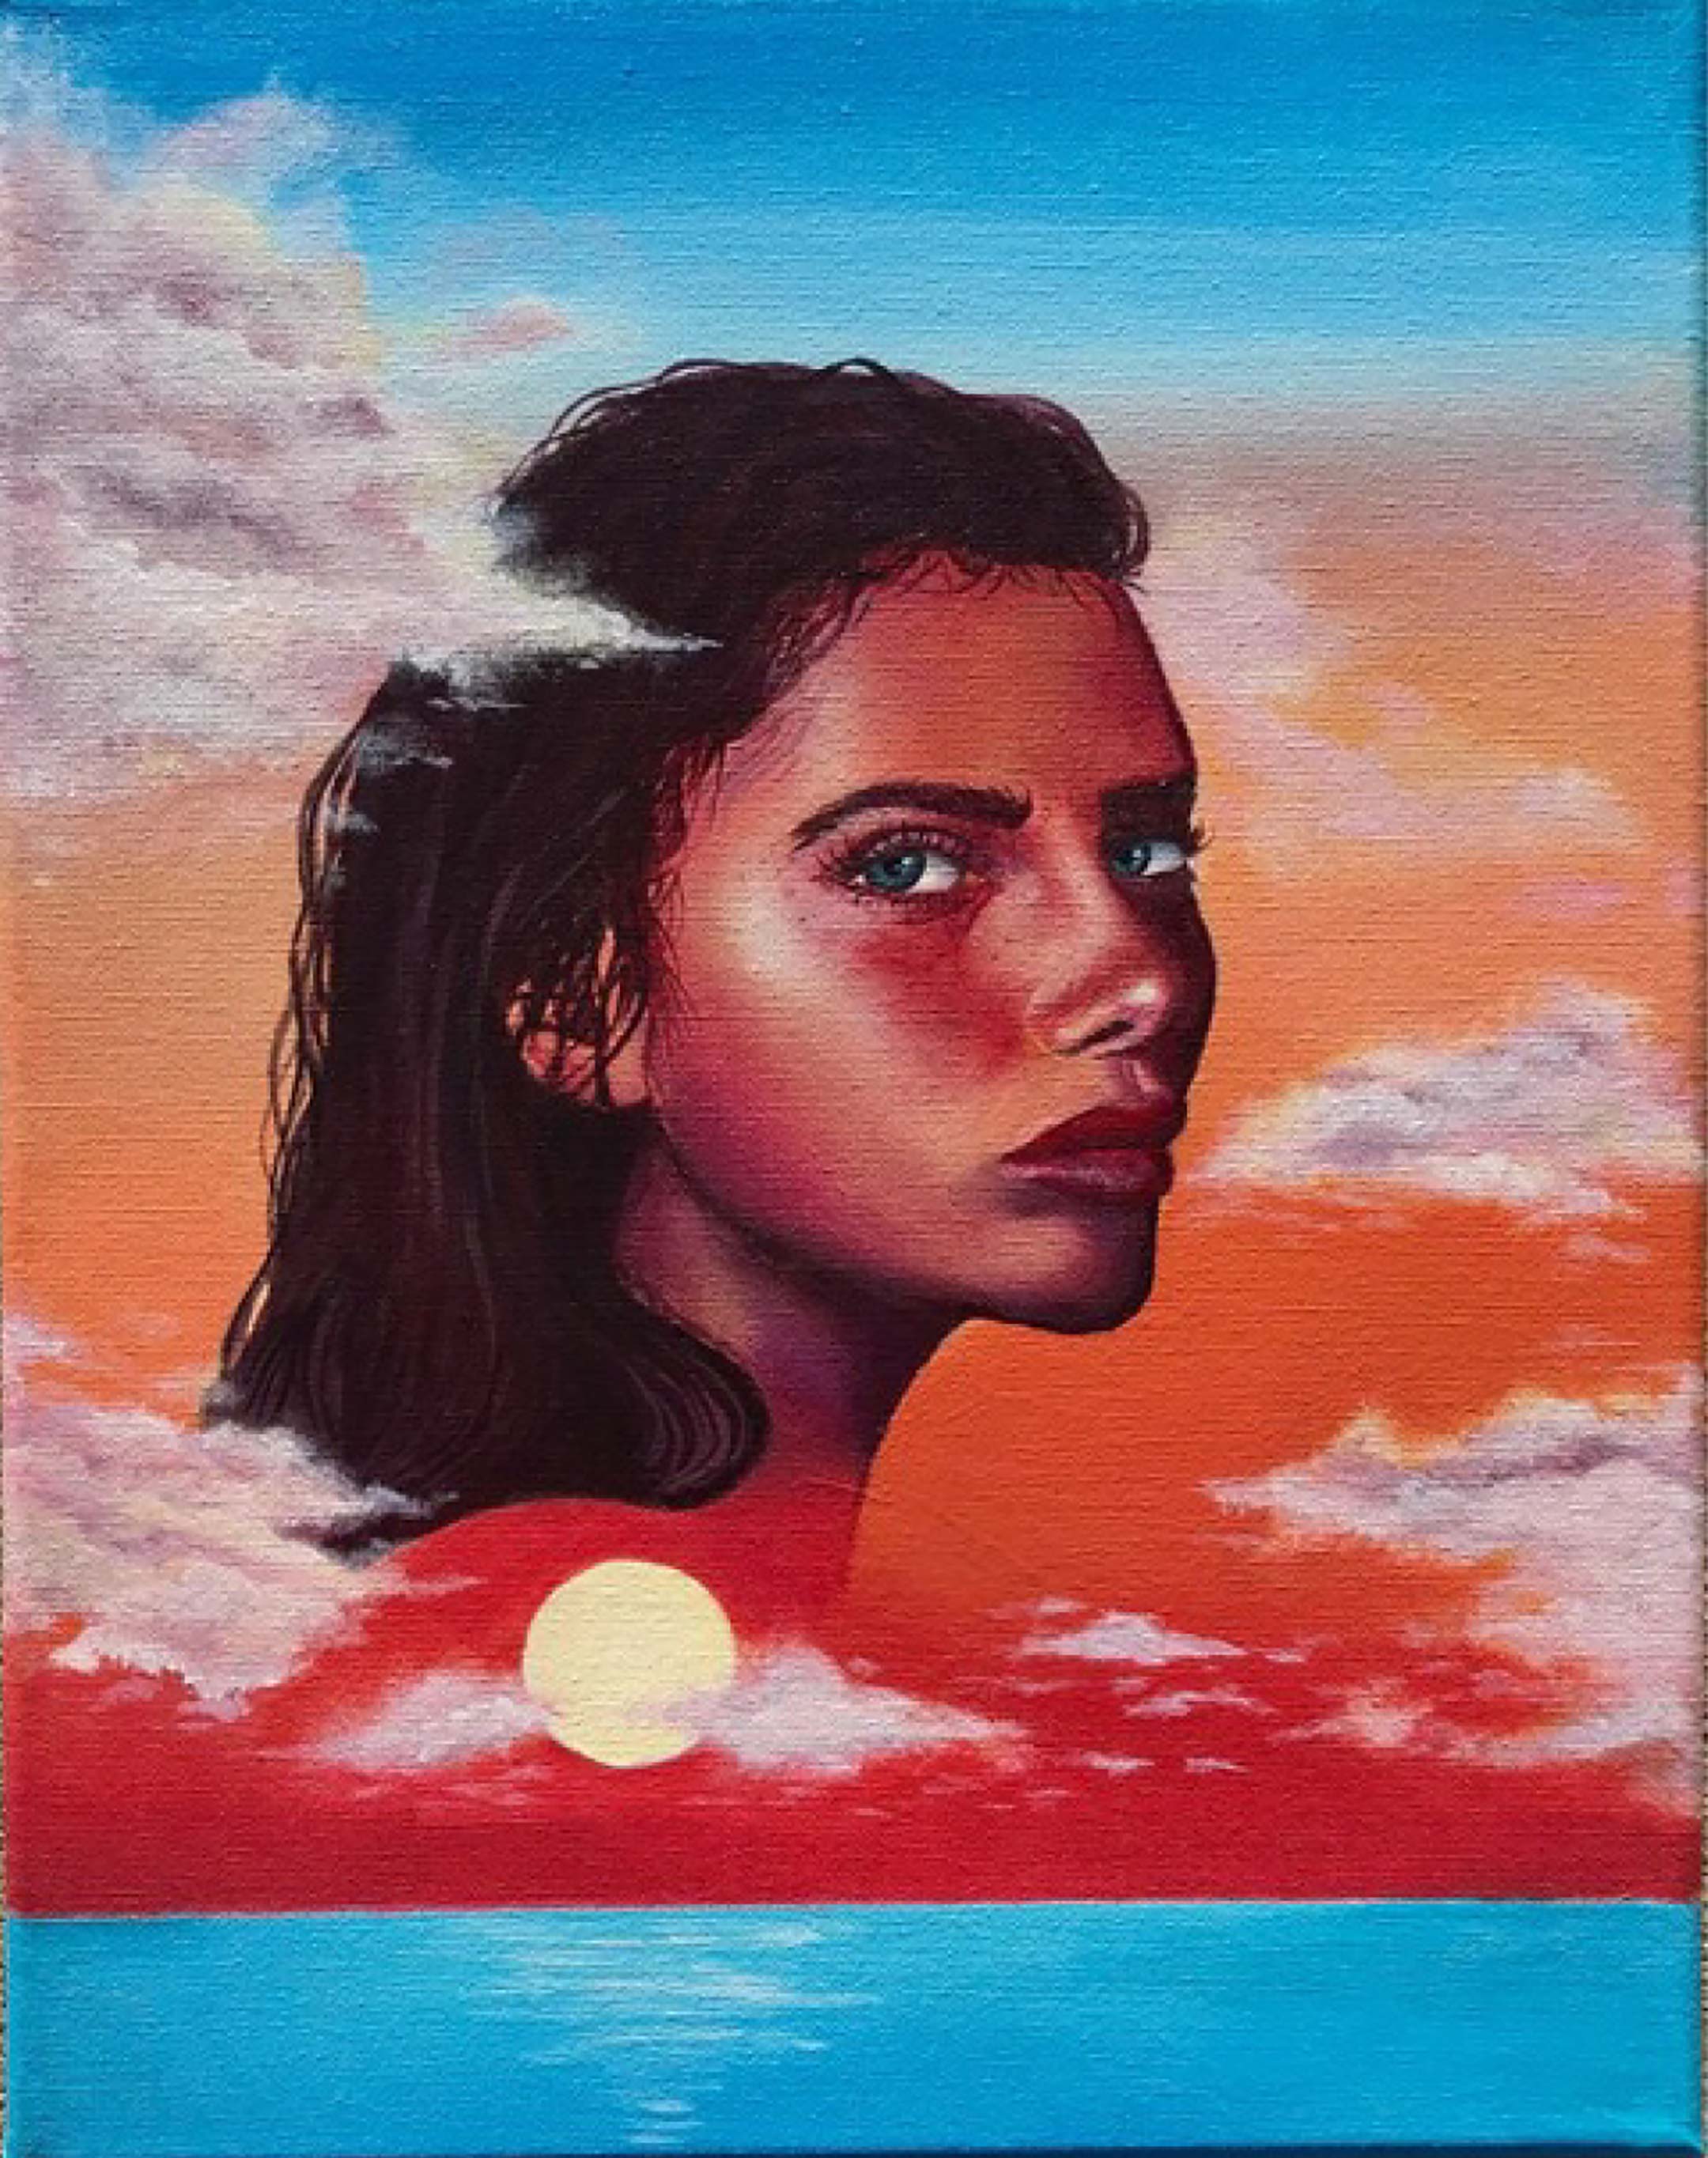 portrait of a young white woman positioned in an orange and blue sky above a sunset over an ocean